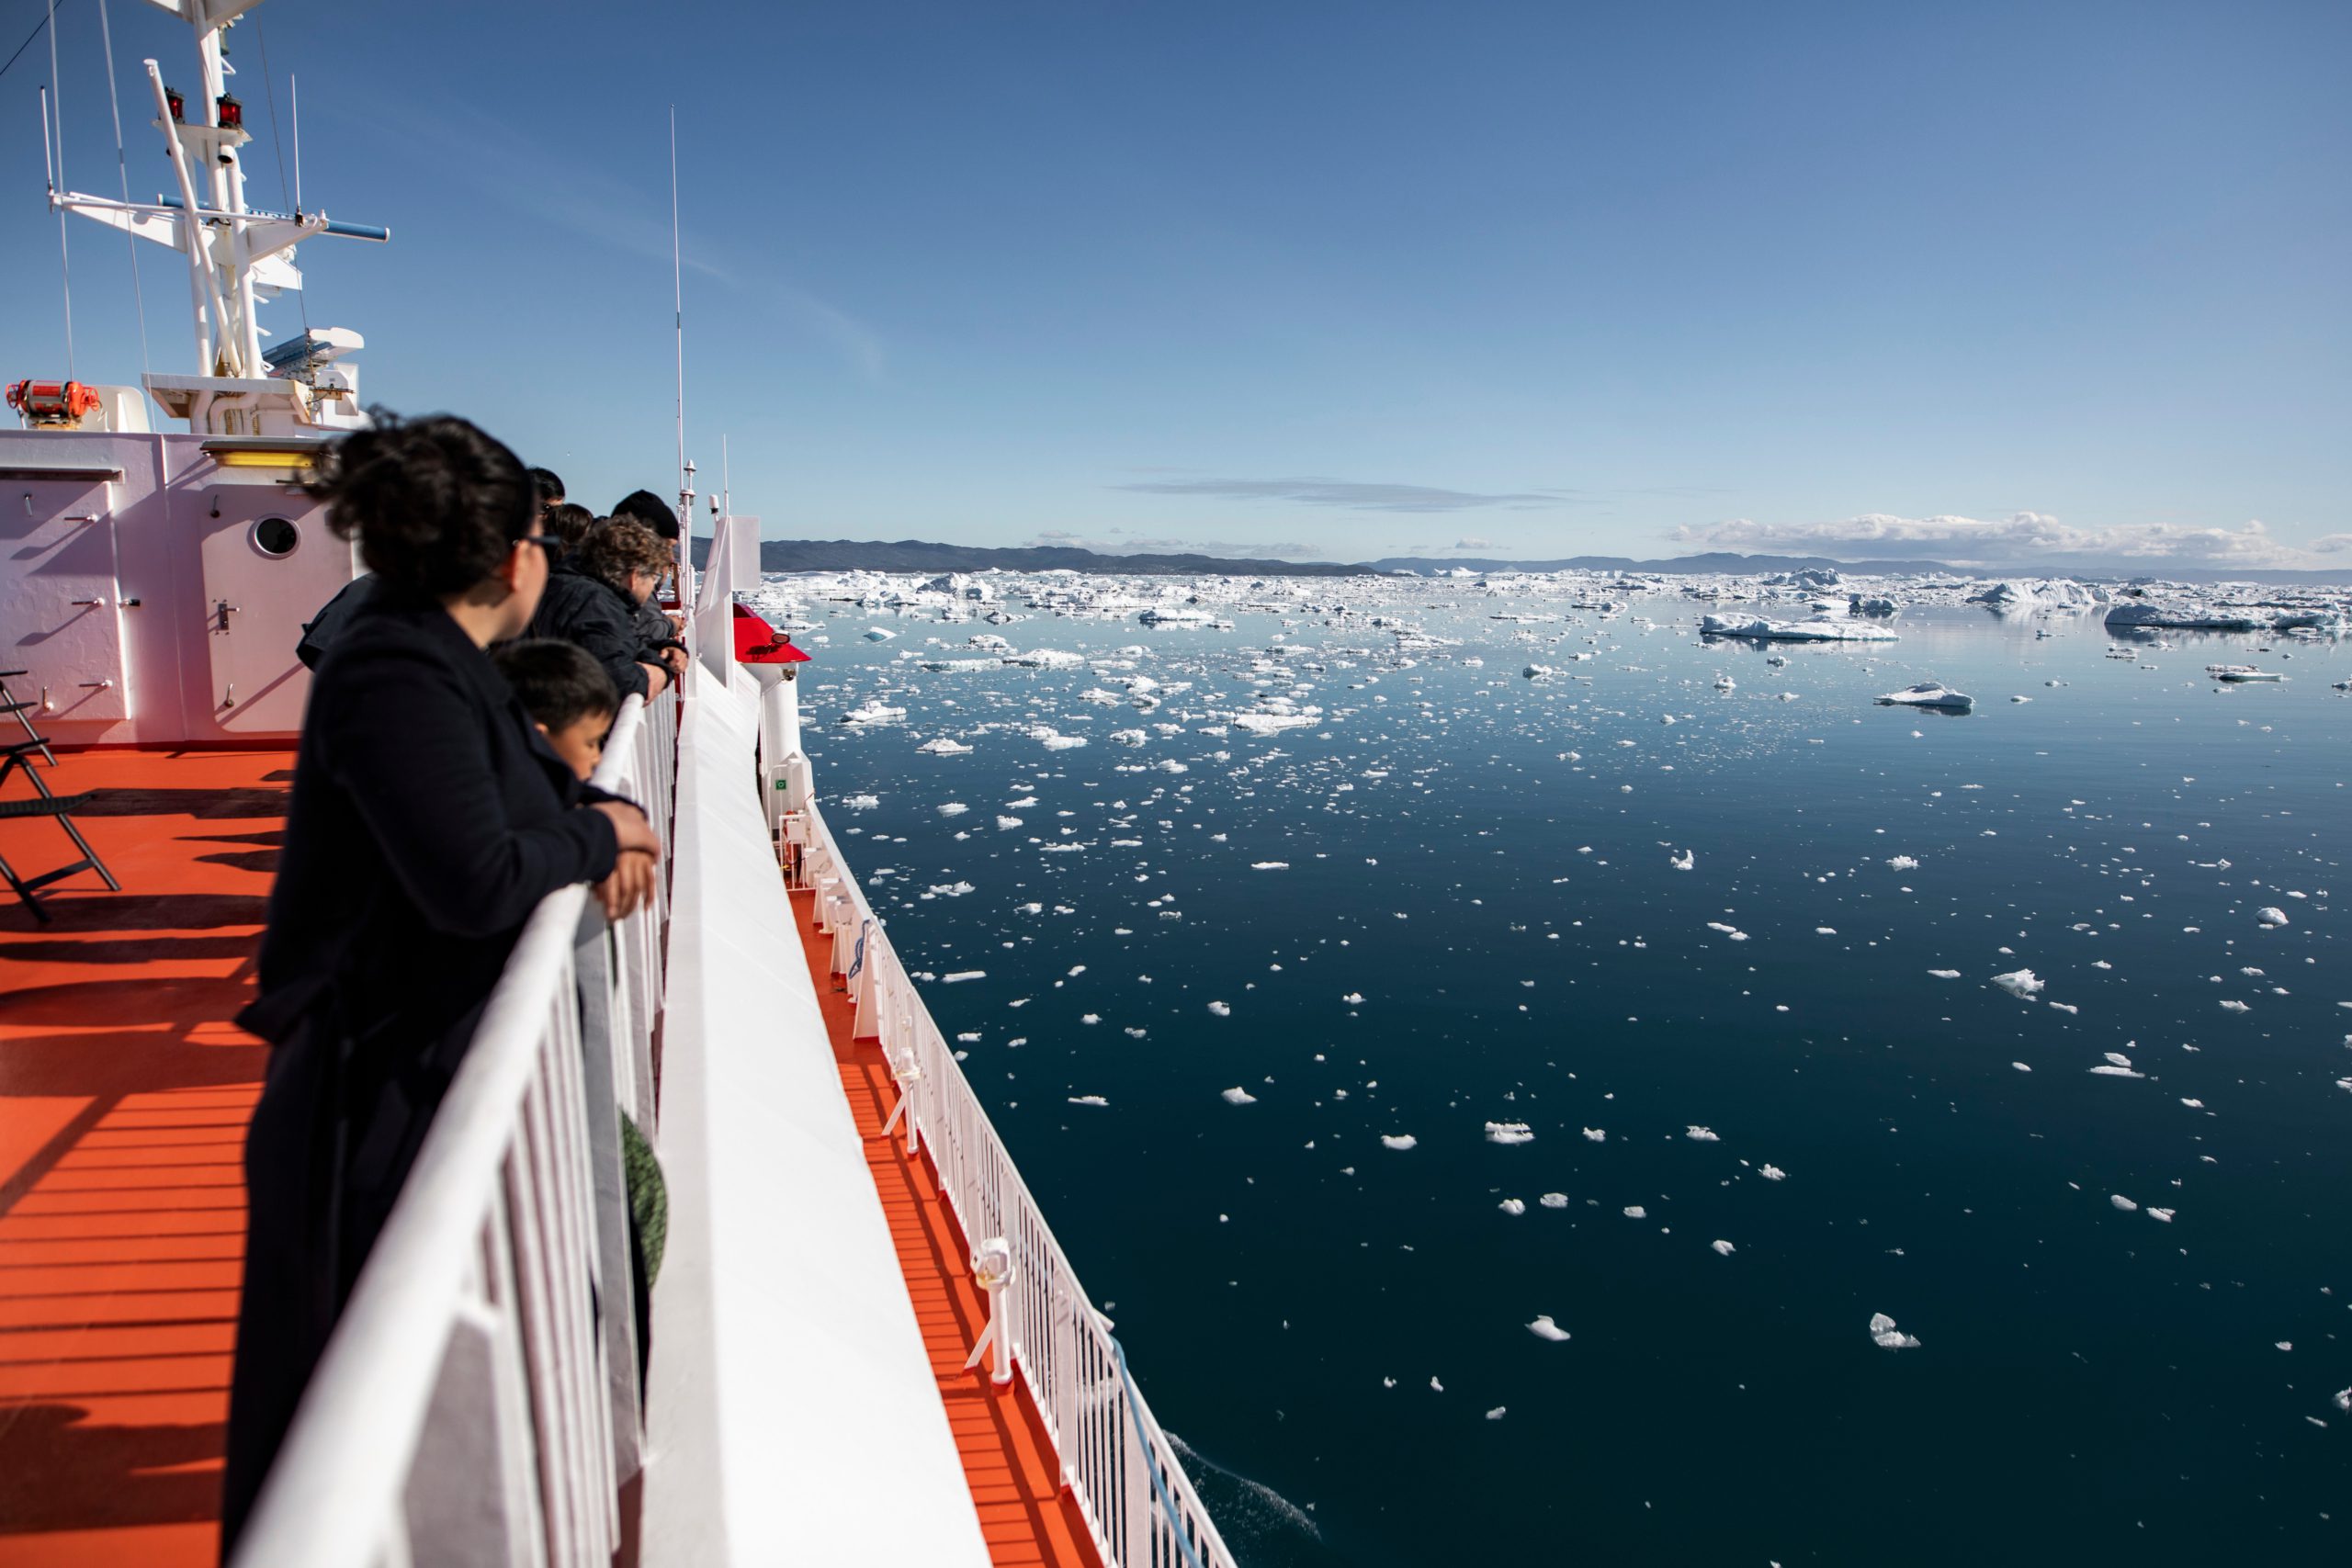 Ferry passengers standing on the deck to look at the Ilulissat icefjord